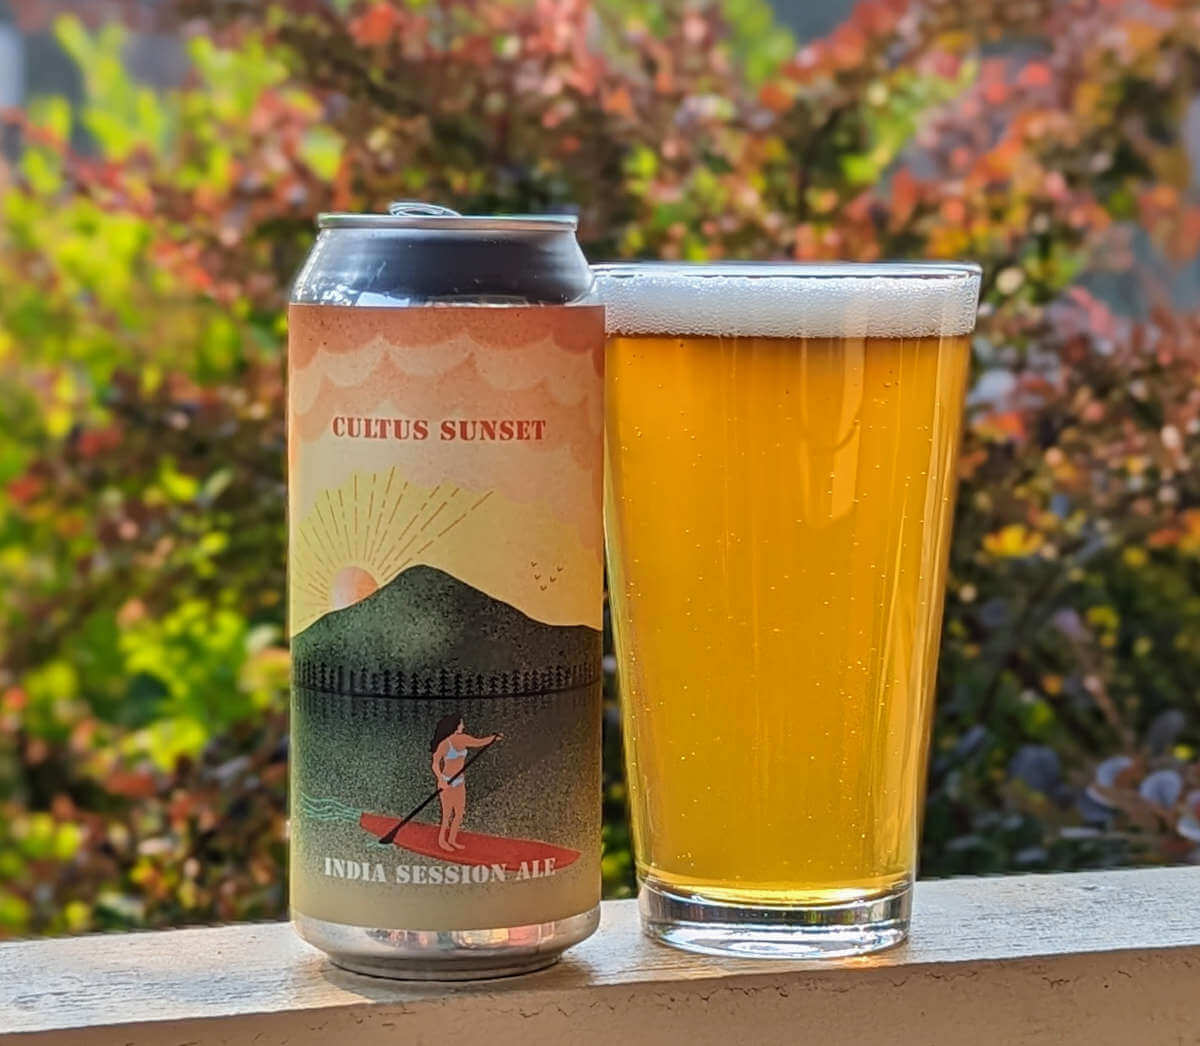 Latest print article: Oblivion Brewing at 10 years